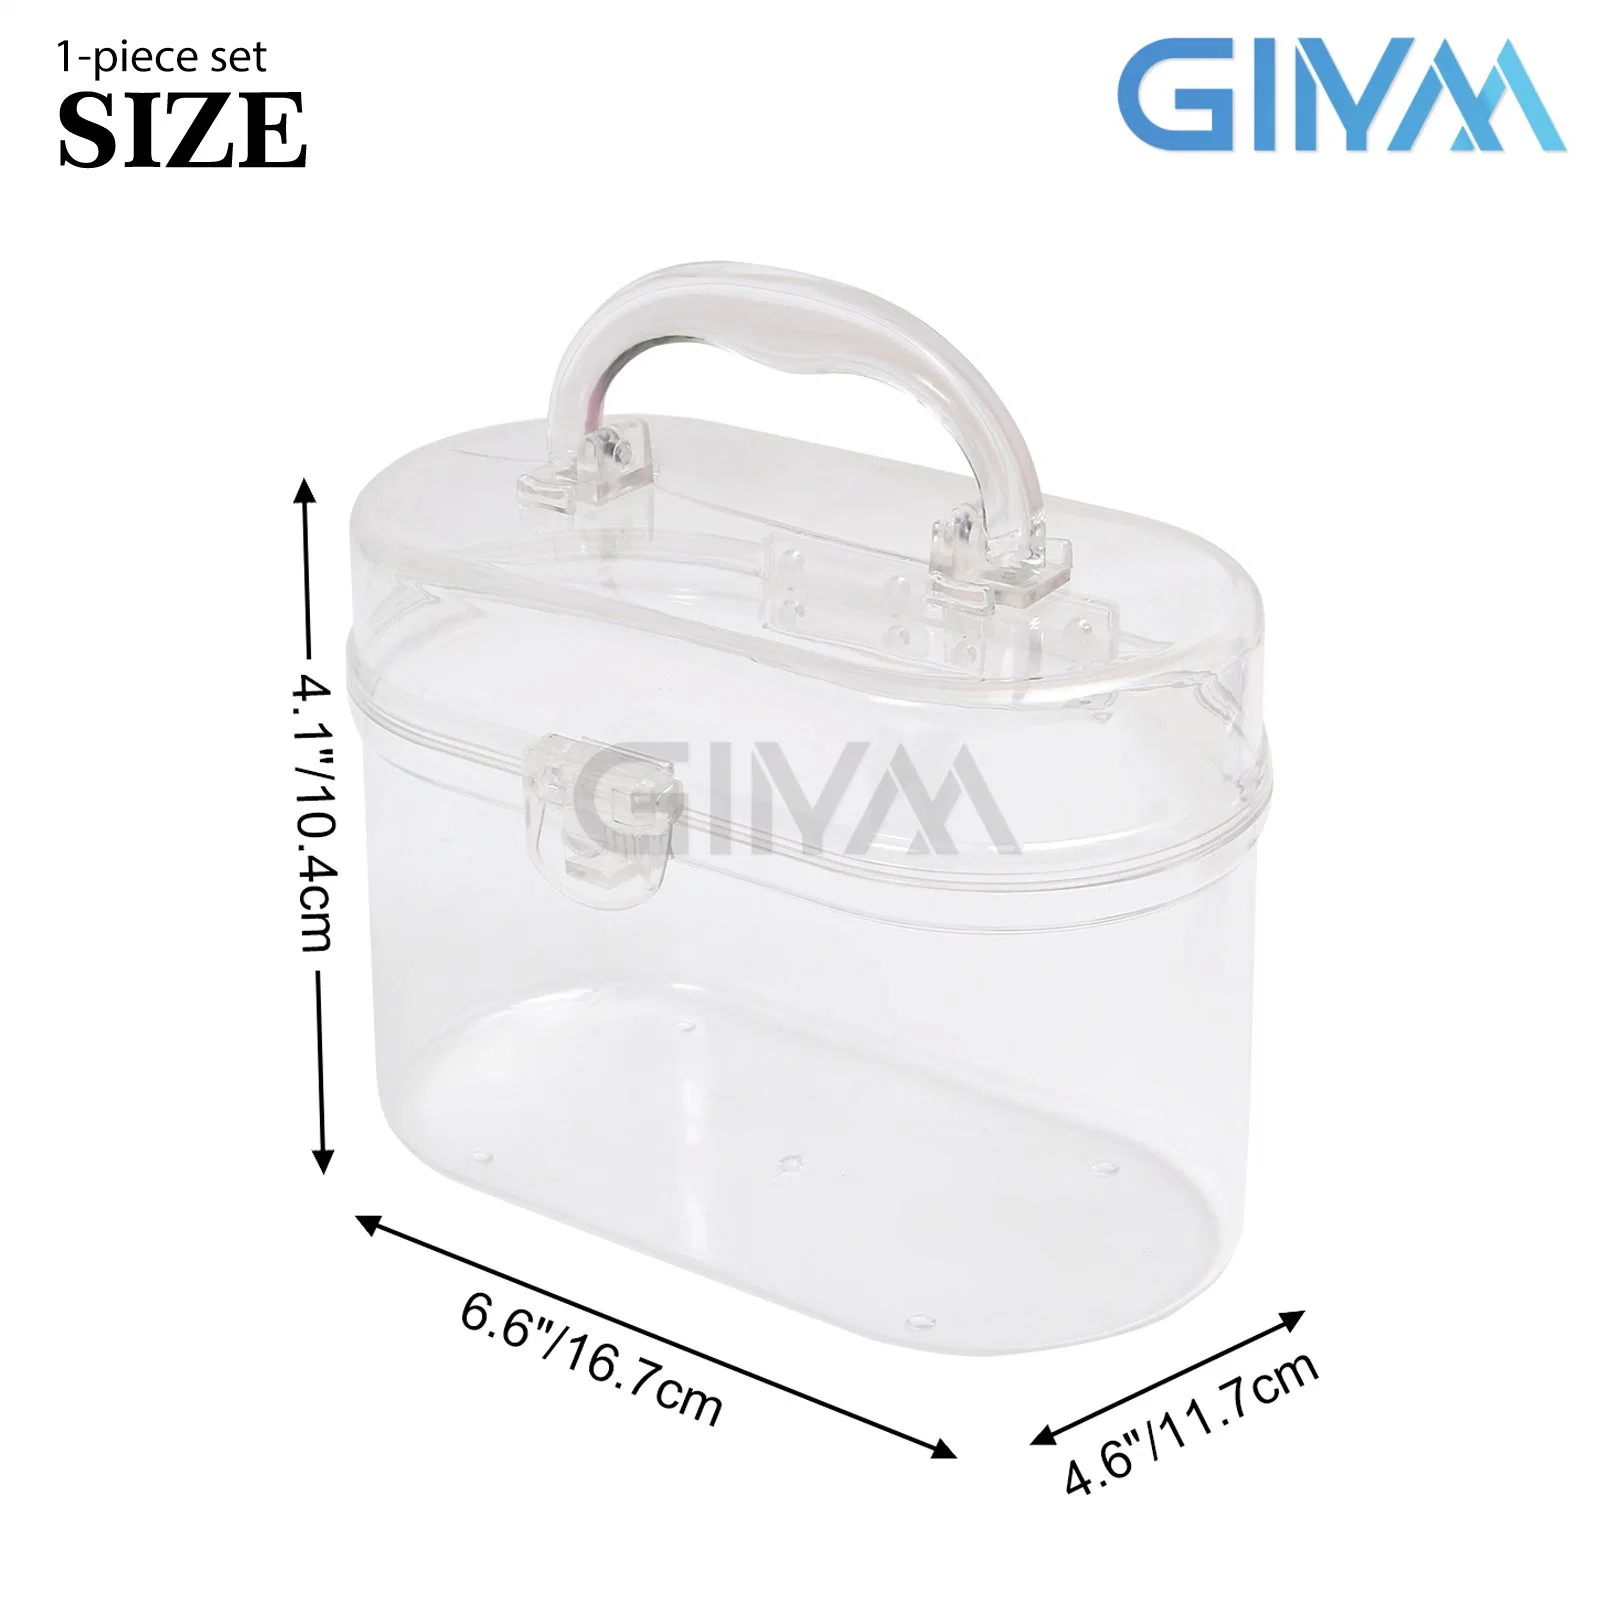 Transparent Bathroom Storage Container with Cover and Handle